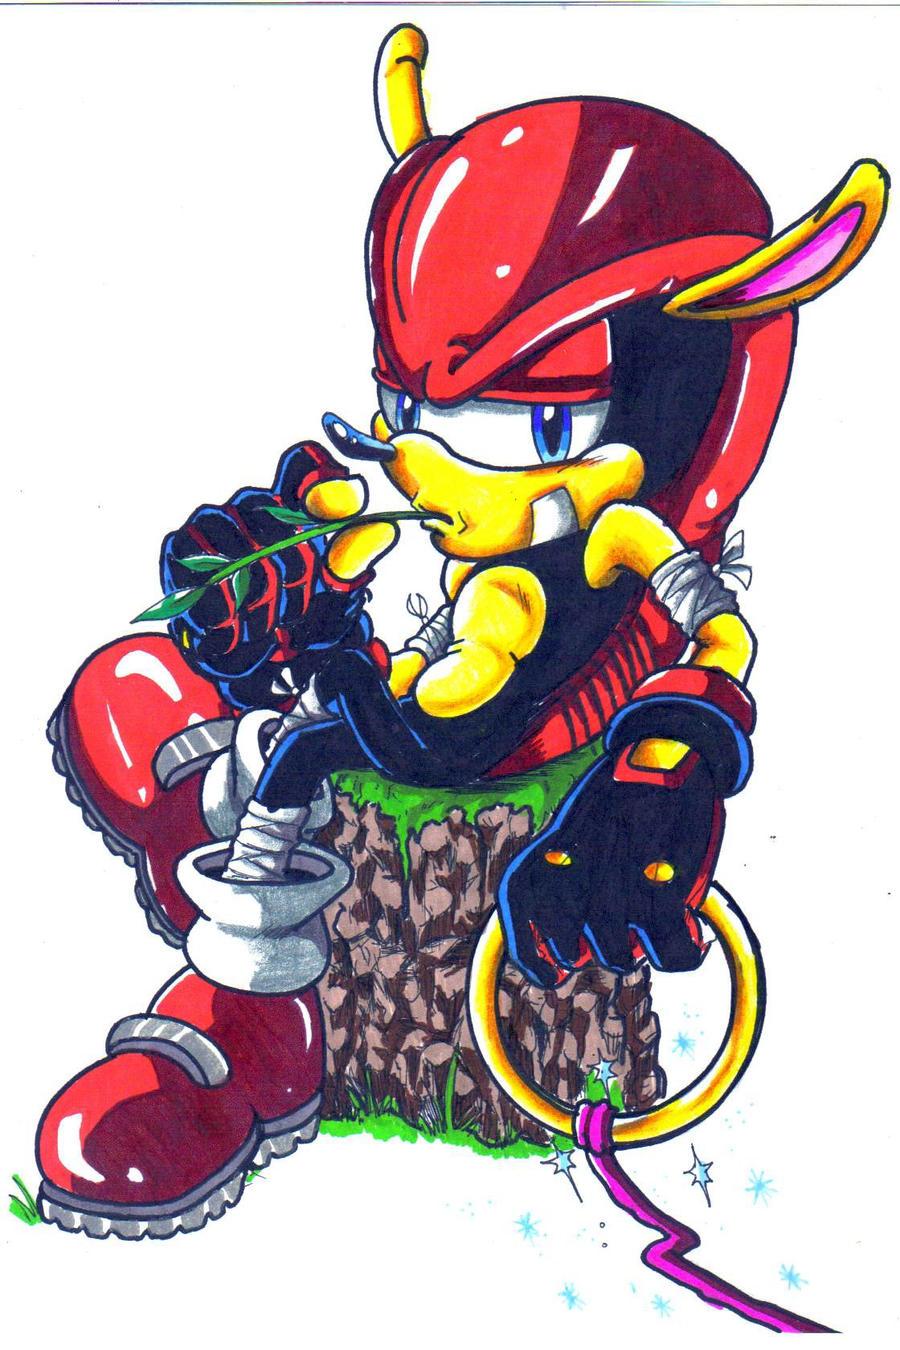 Mighty the Armadillo by Rings1234 -- Fur Affinity [dot] net